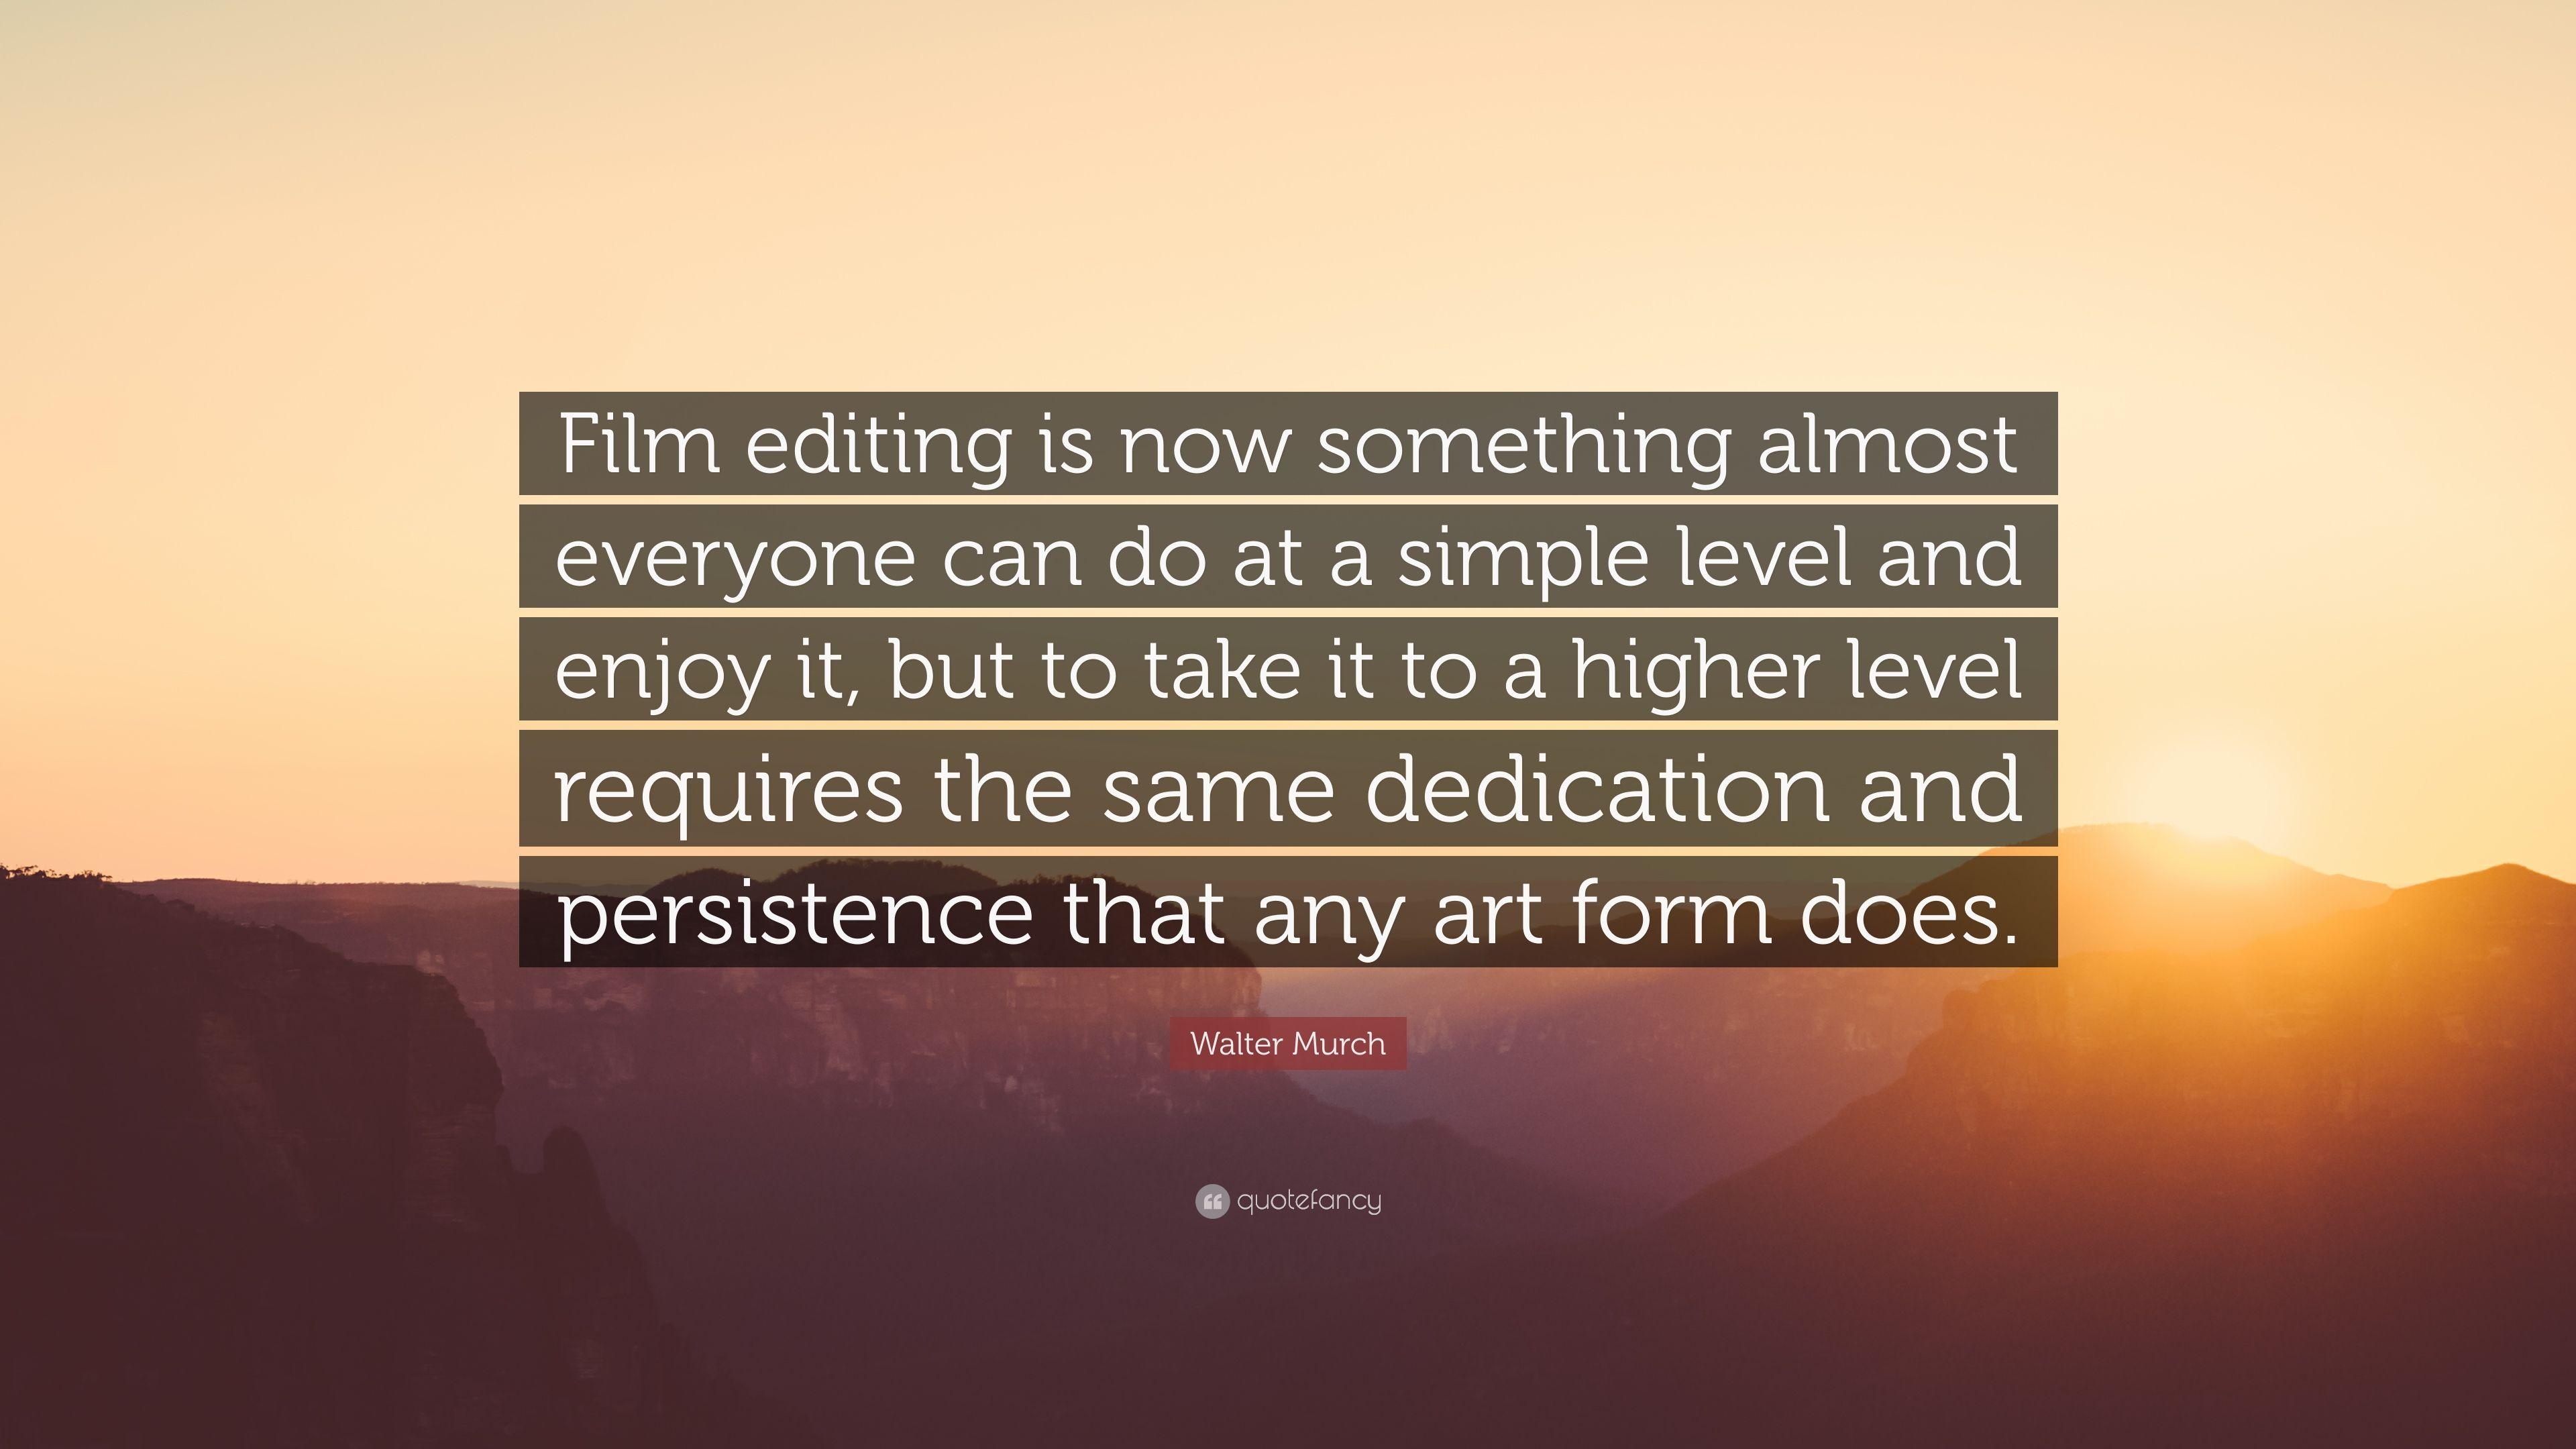 Walter Murch Quote: “Film editing is now something almost everyone